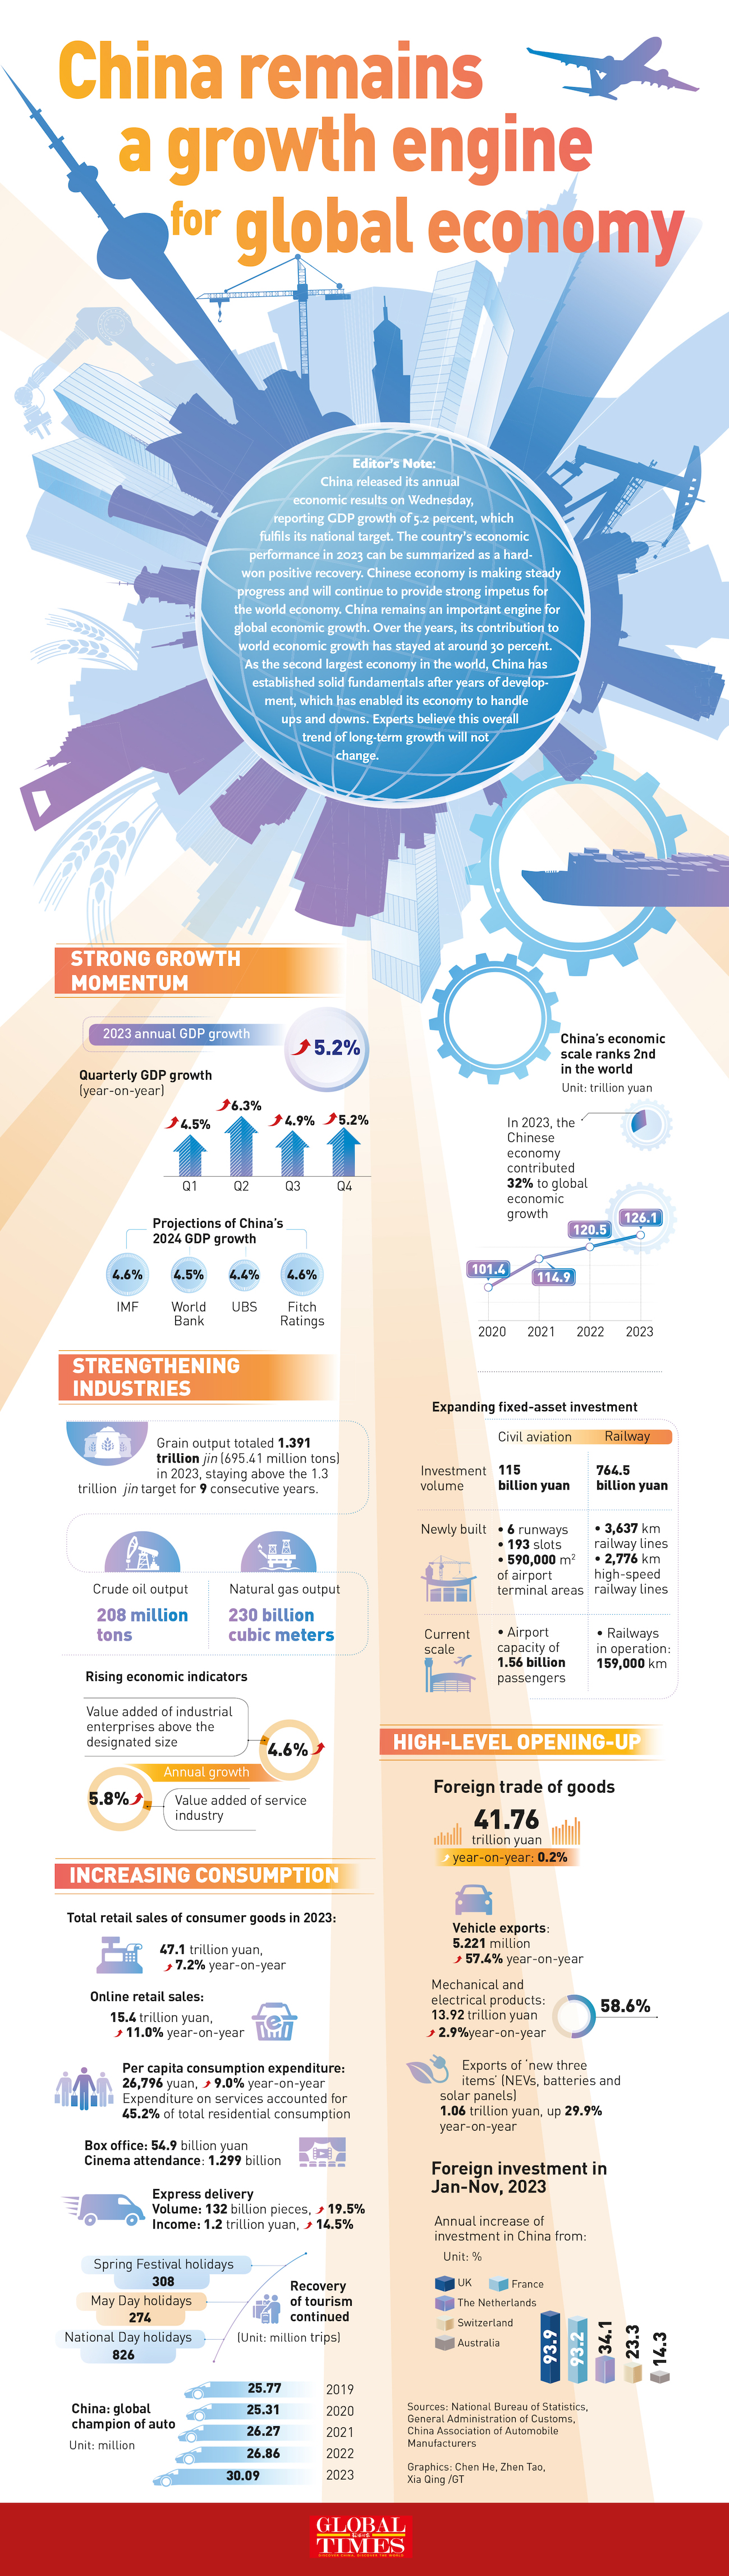 China remains a global economic growth engine Infographic: GT